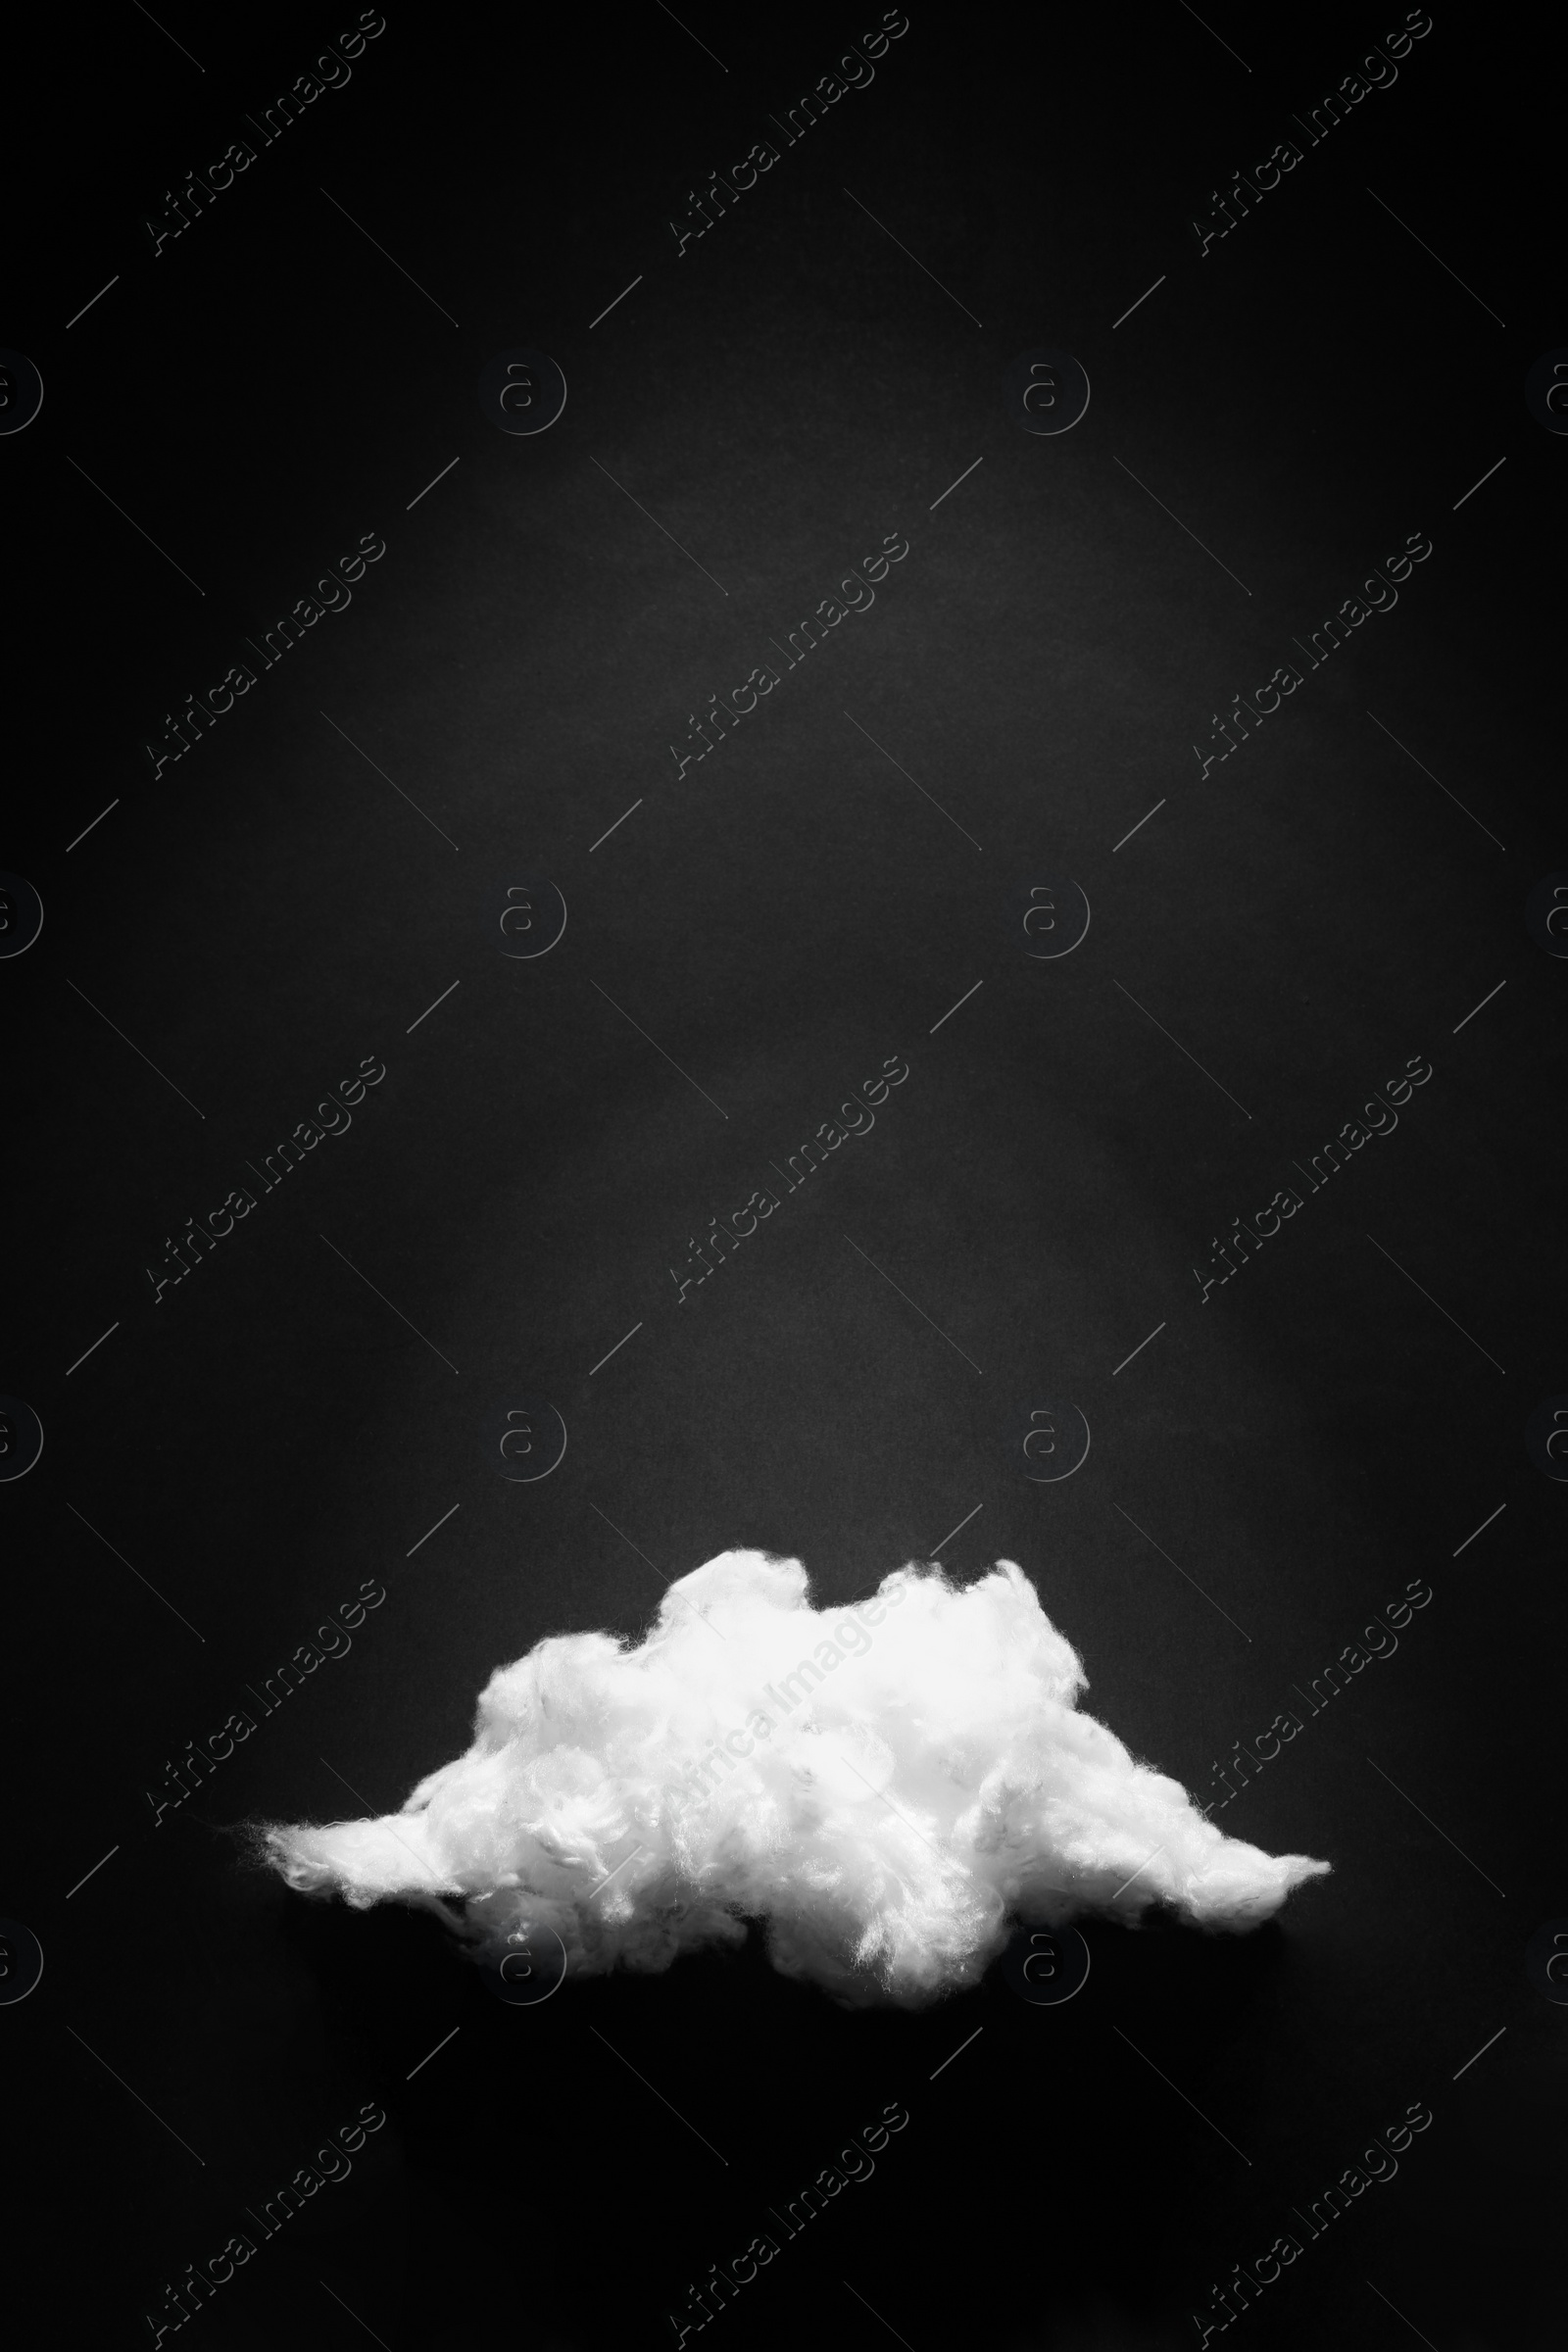 Photo of Cloud made of cotton on black background. Space for text